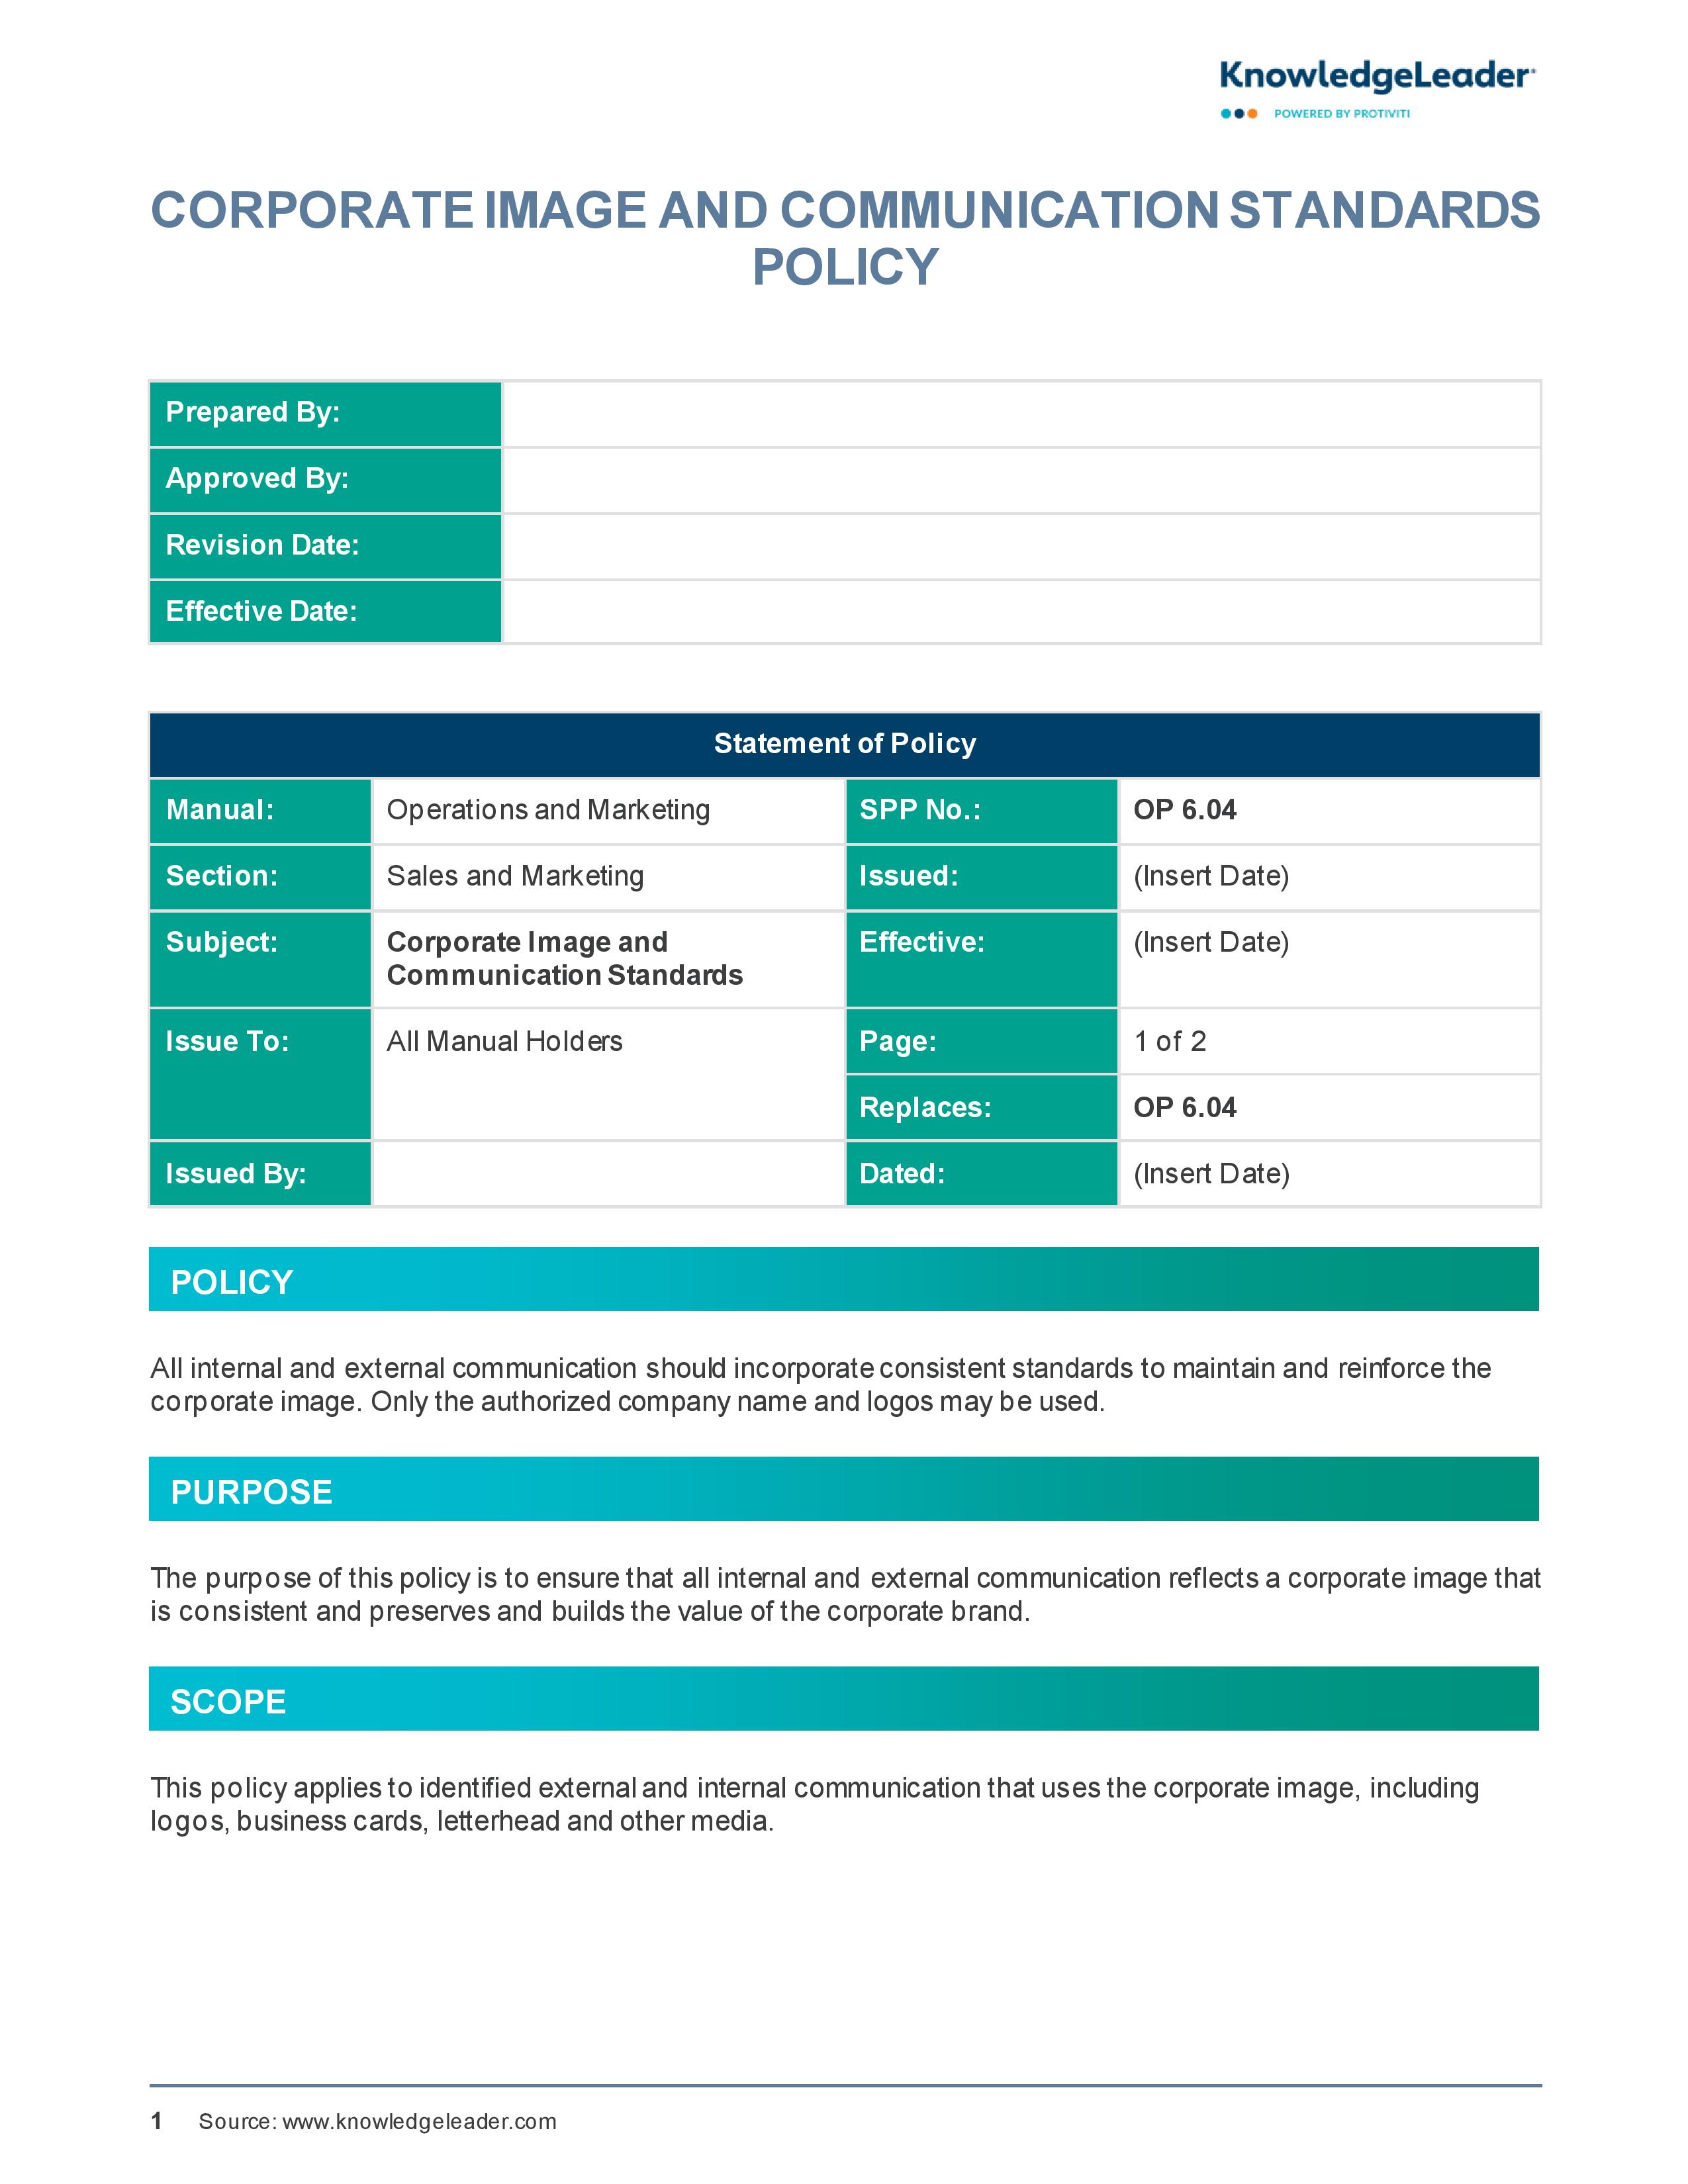 Screenshot of the first page of Corporate Image and Communication Standards Policy